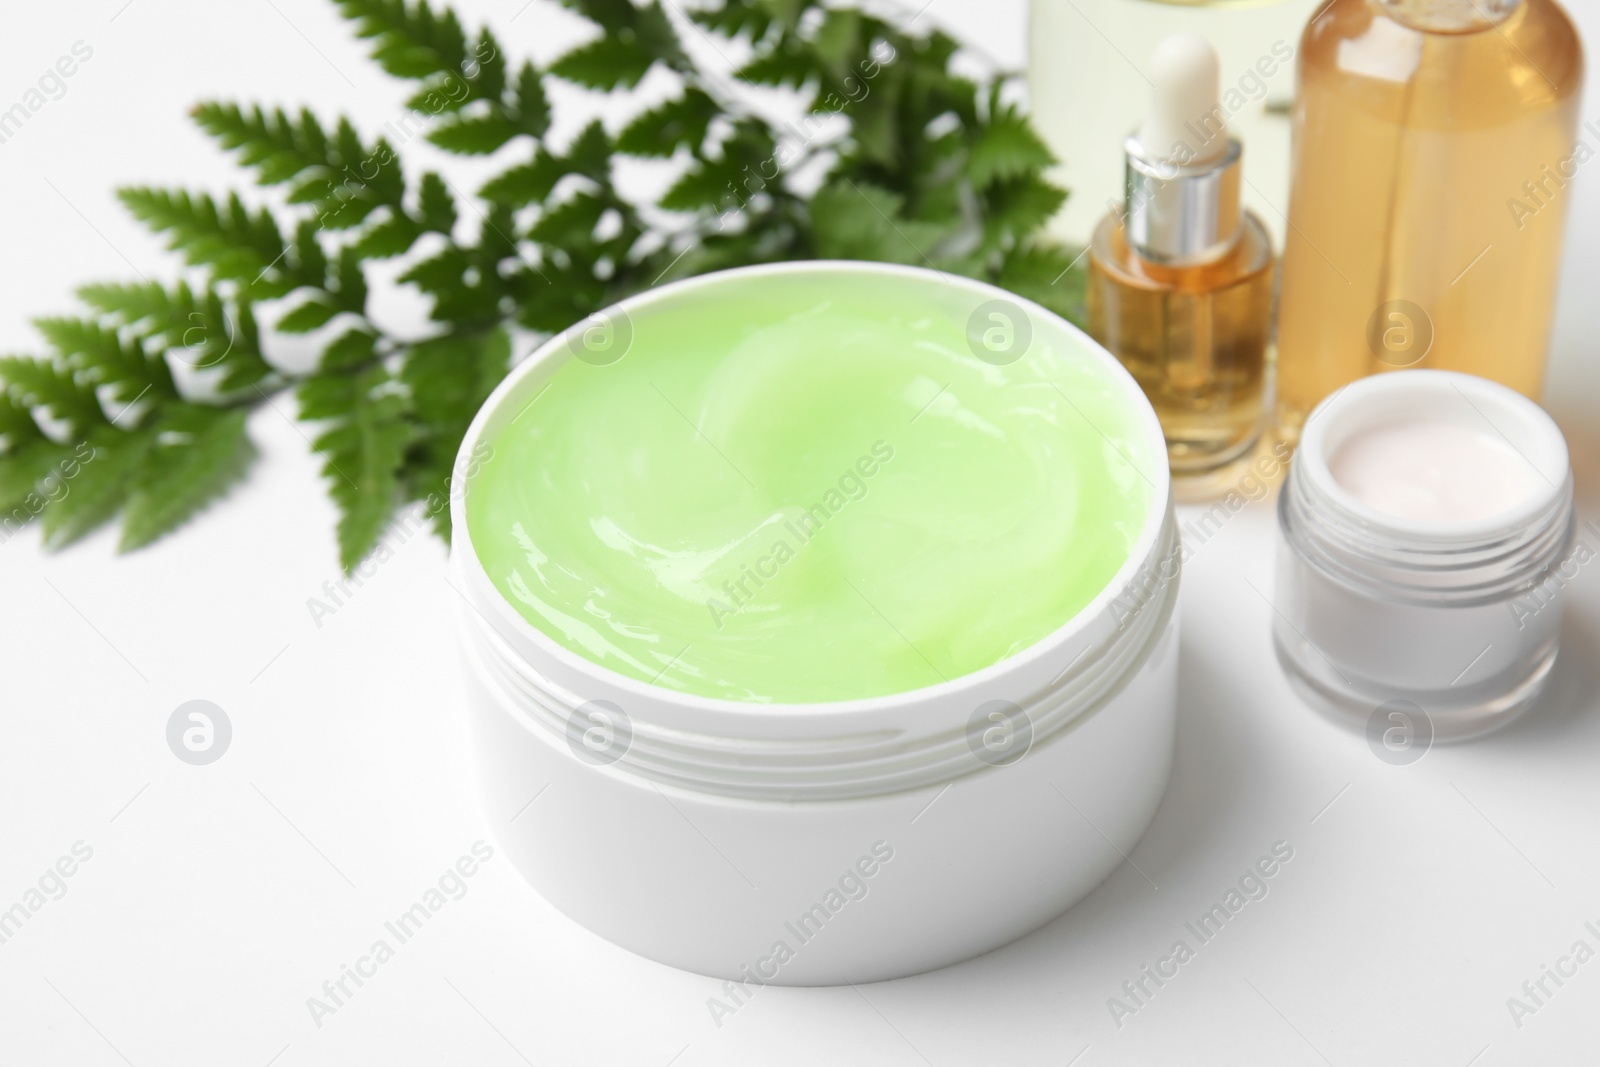 Photo of Different body care products on white background. Mockup for design